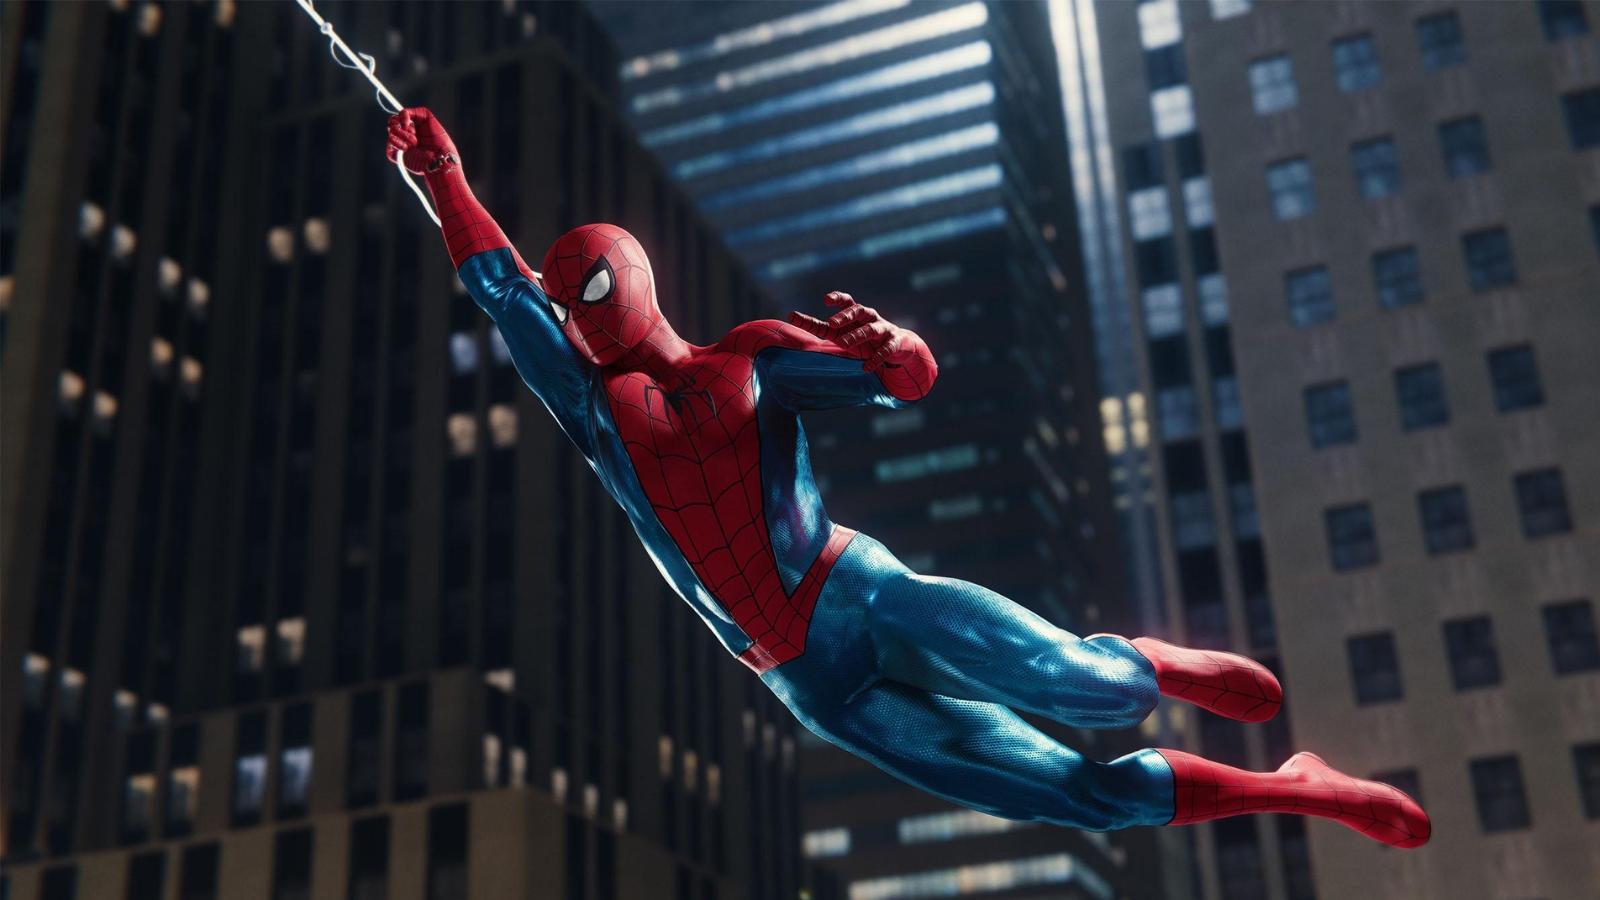 Spider-Man 2 suits list - How to unlock all suits